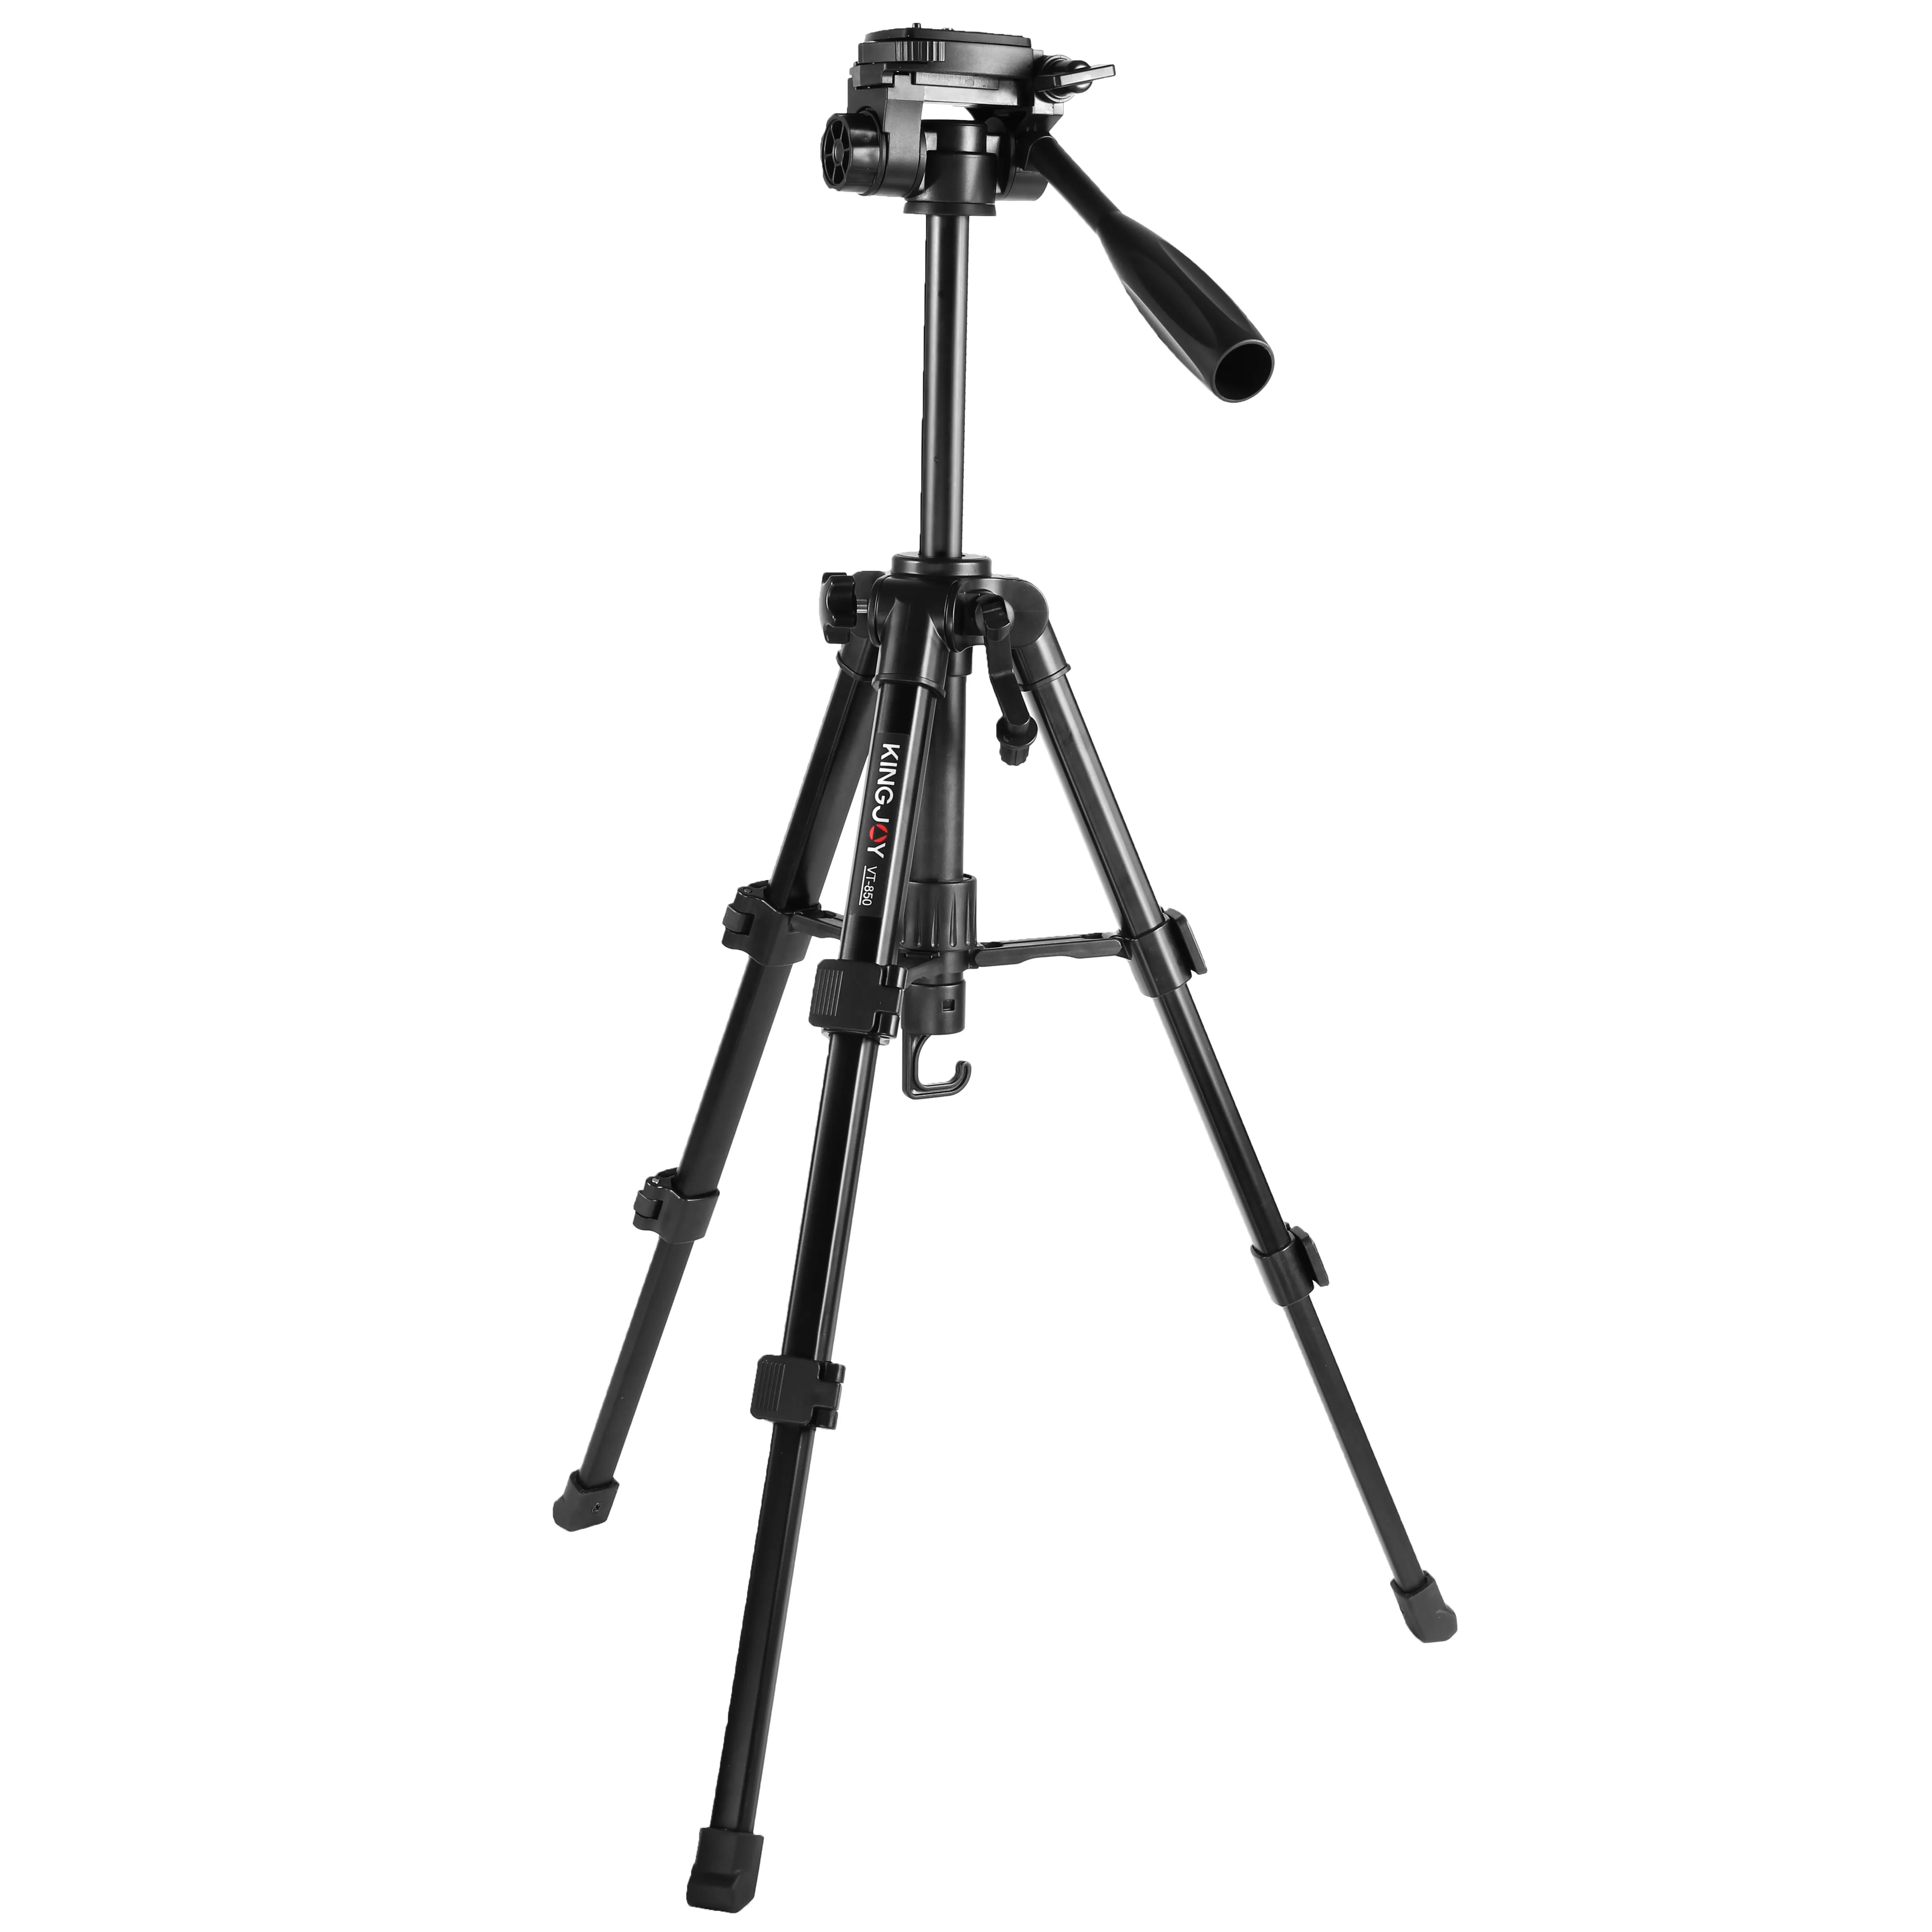 Light Weight Travel Portable Aluminum Camera Tripod for Canon Nikon Sony DSLR Camera with Carry Case